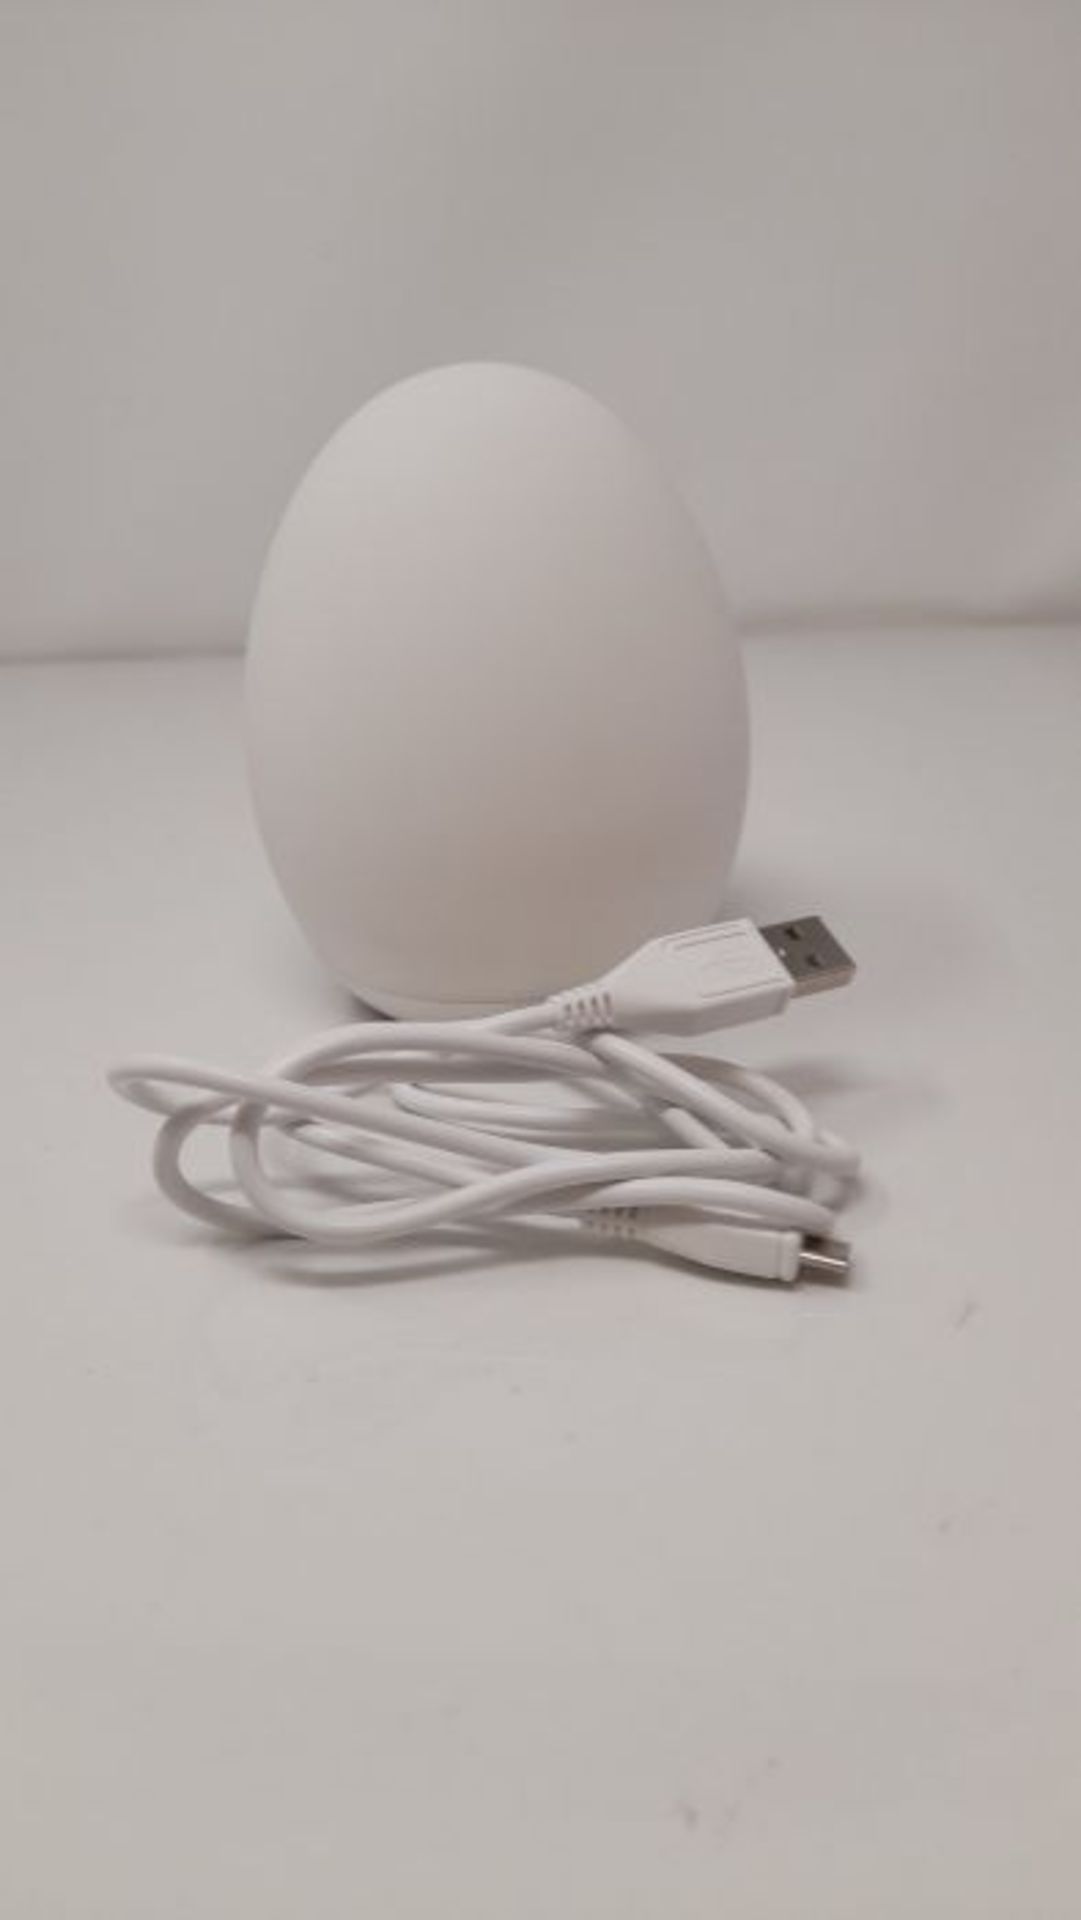 VAVA LED Night Light for Kids, USB Rechargeable Silicone Nursery Lamp with Touch Contr - Image 2 of 2